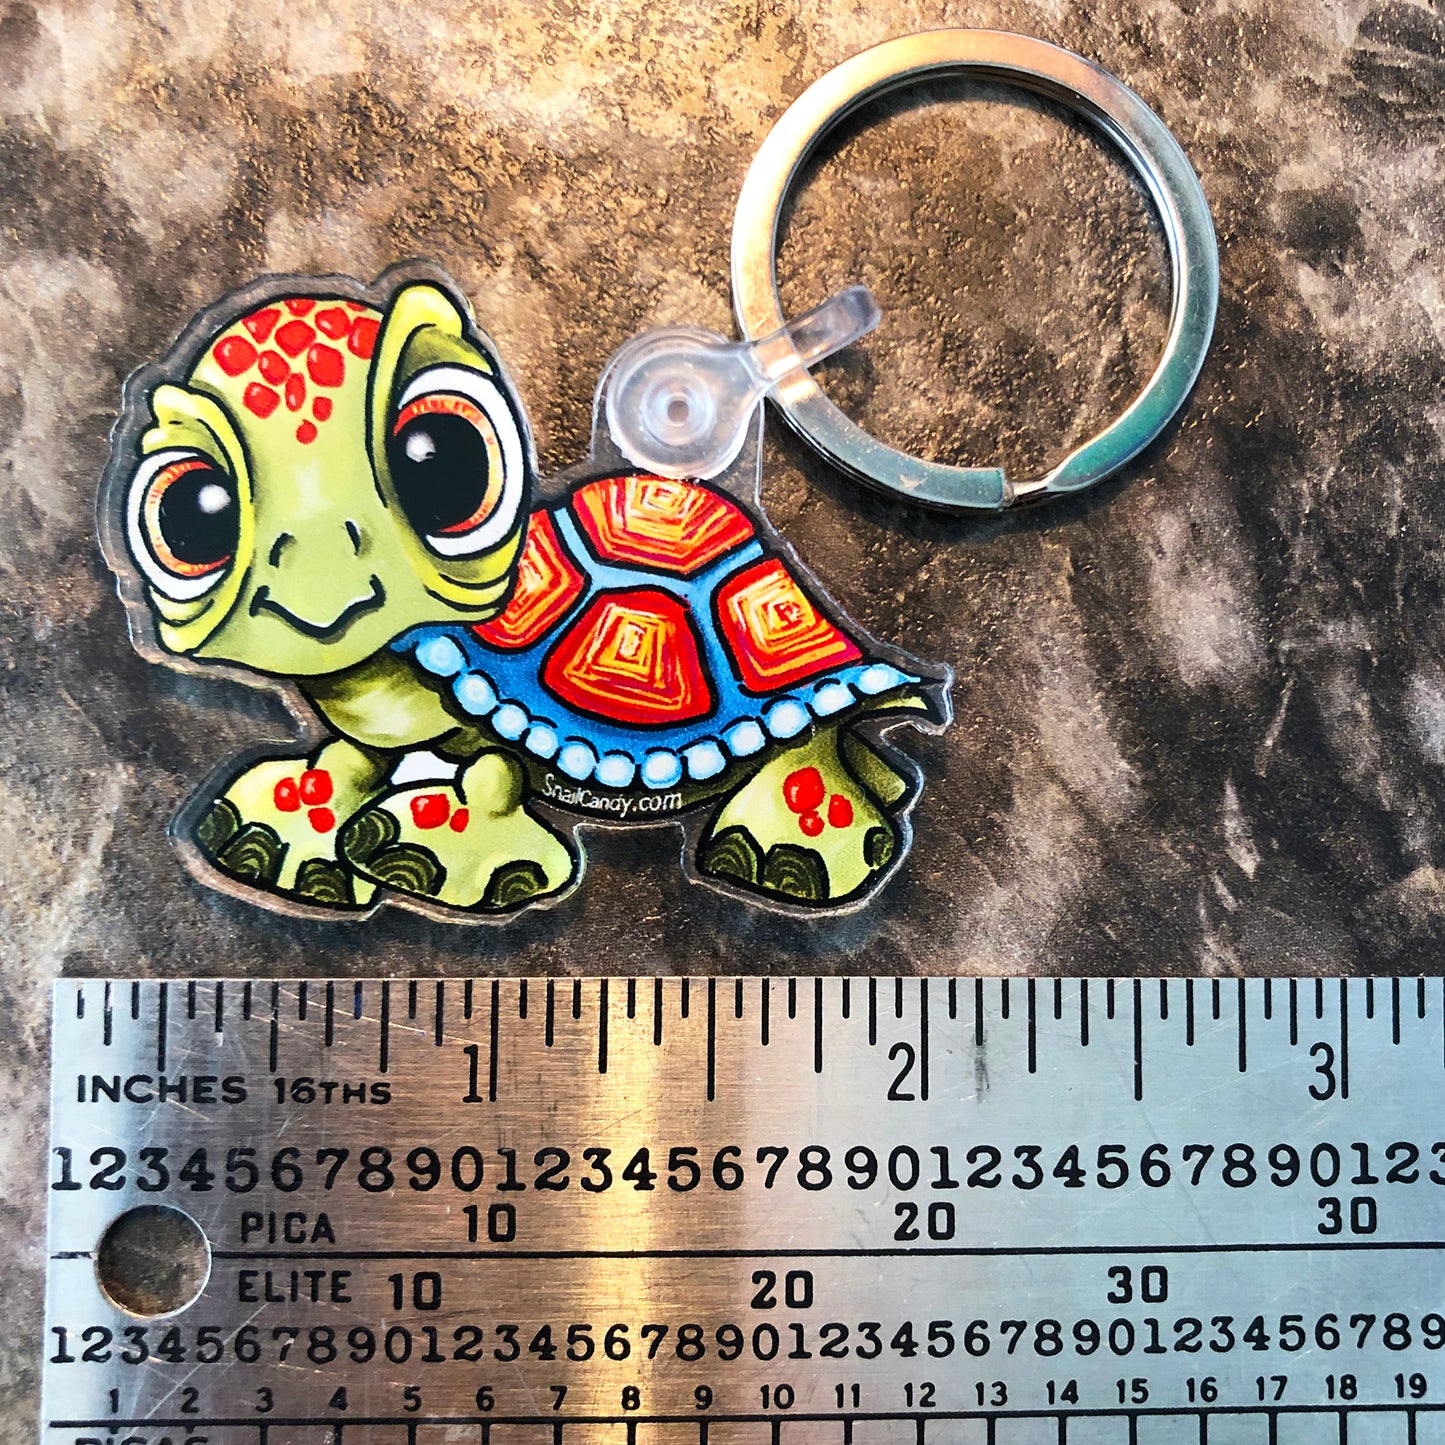 key charm - 'Theo' the Turtle by Tif Choate